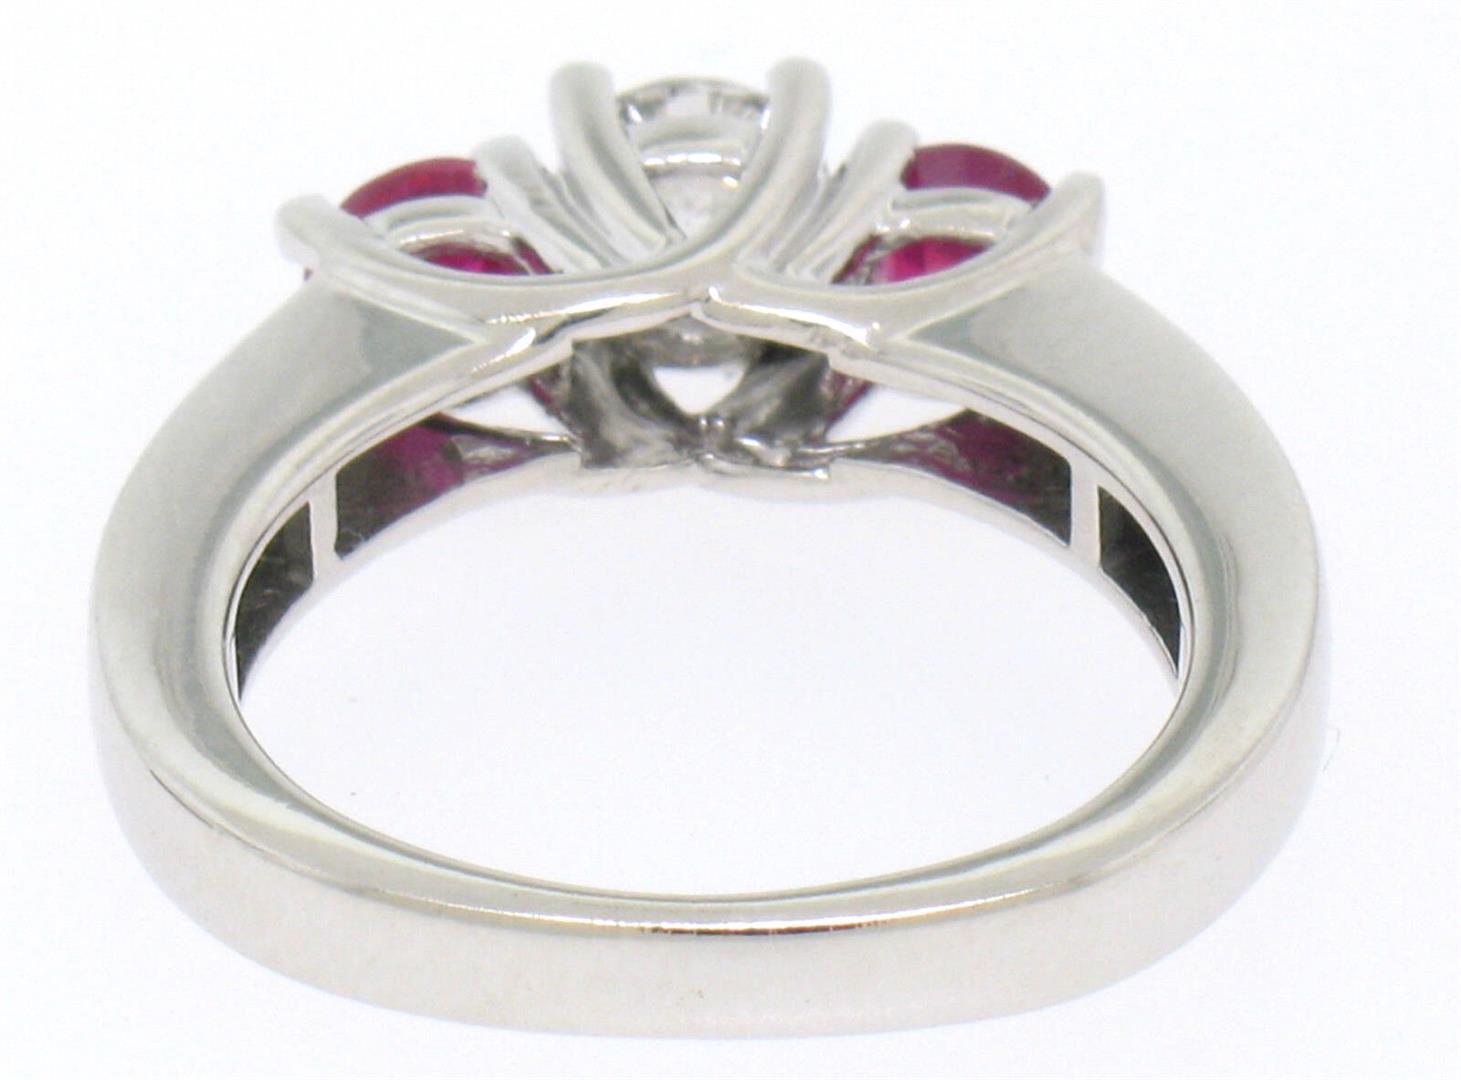 14k White Gold 3 Stone Engagement Ring w/ Ctr Round Diamond & 2 Blood Red Rubies